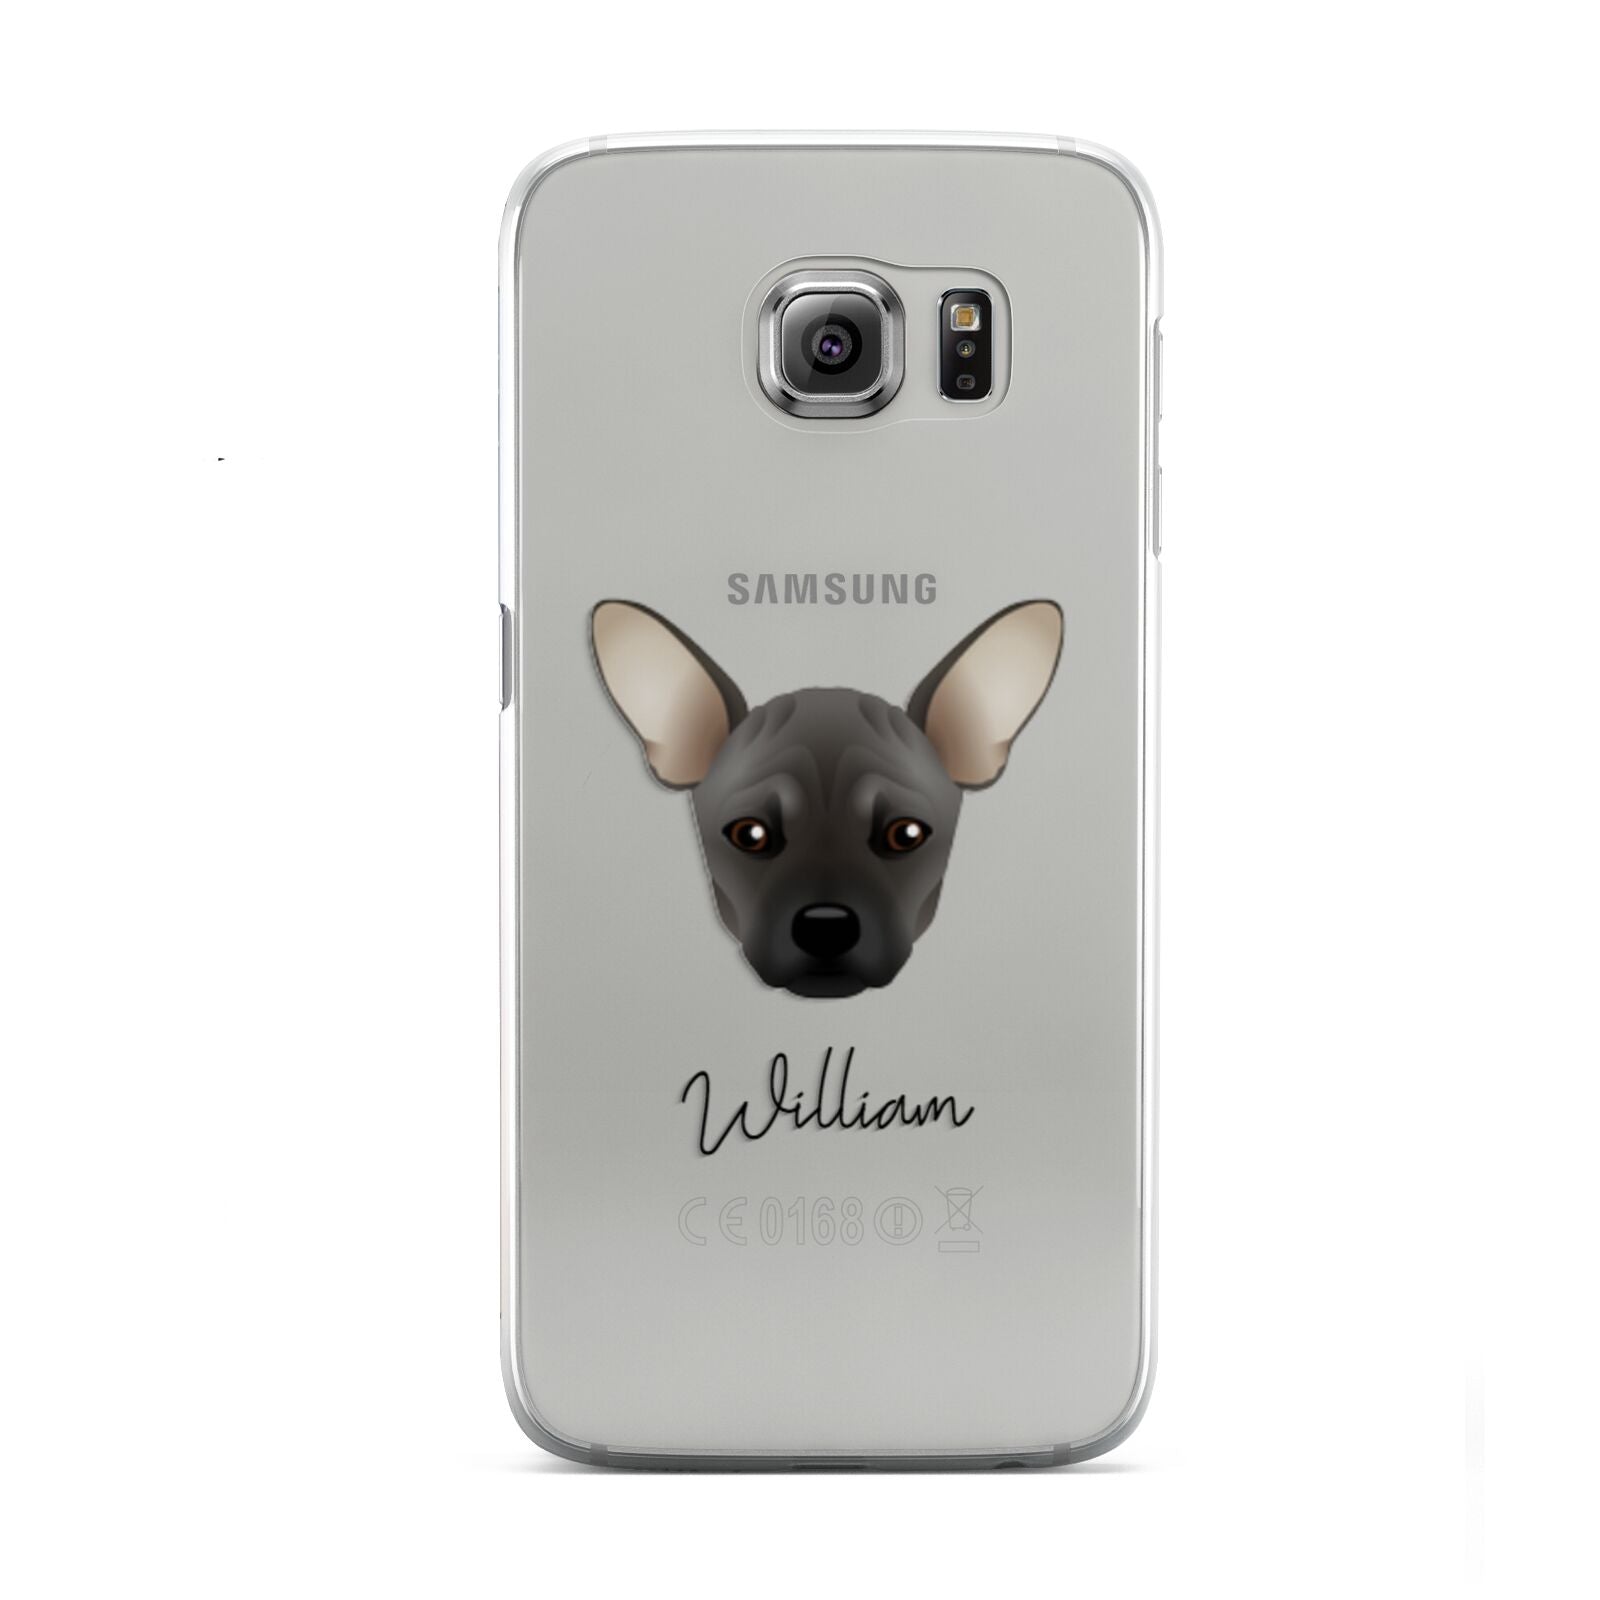 French Pin Personalised Samsung Galaxy S6 Case